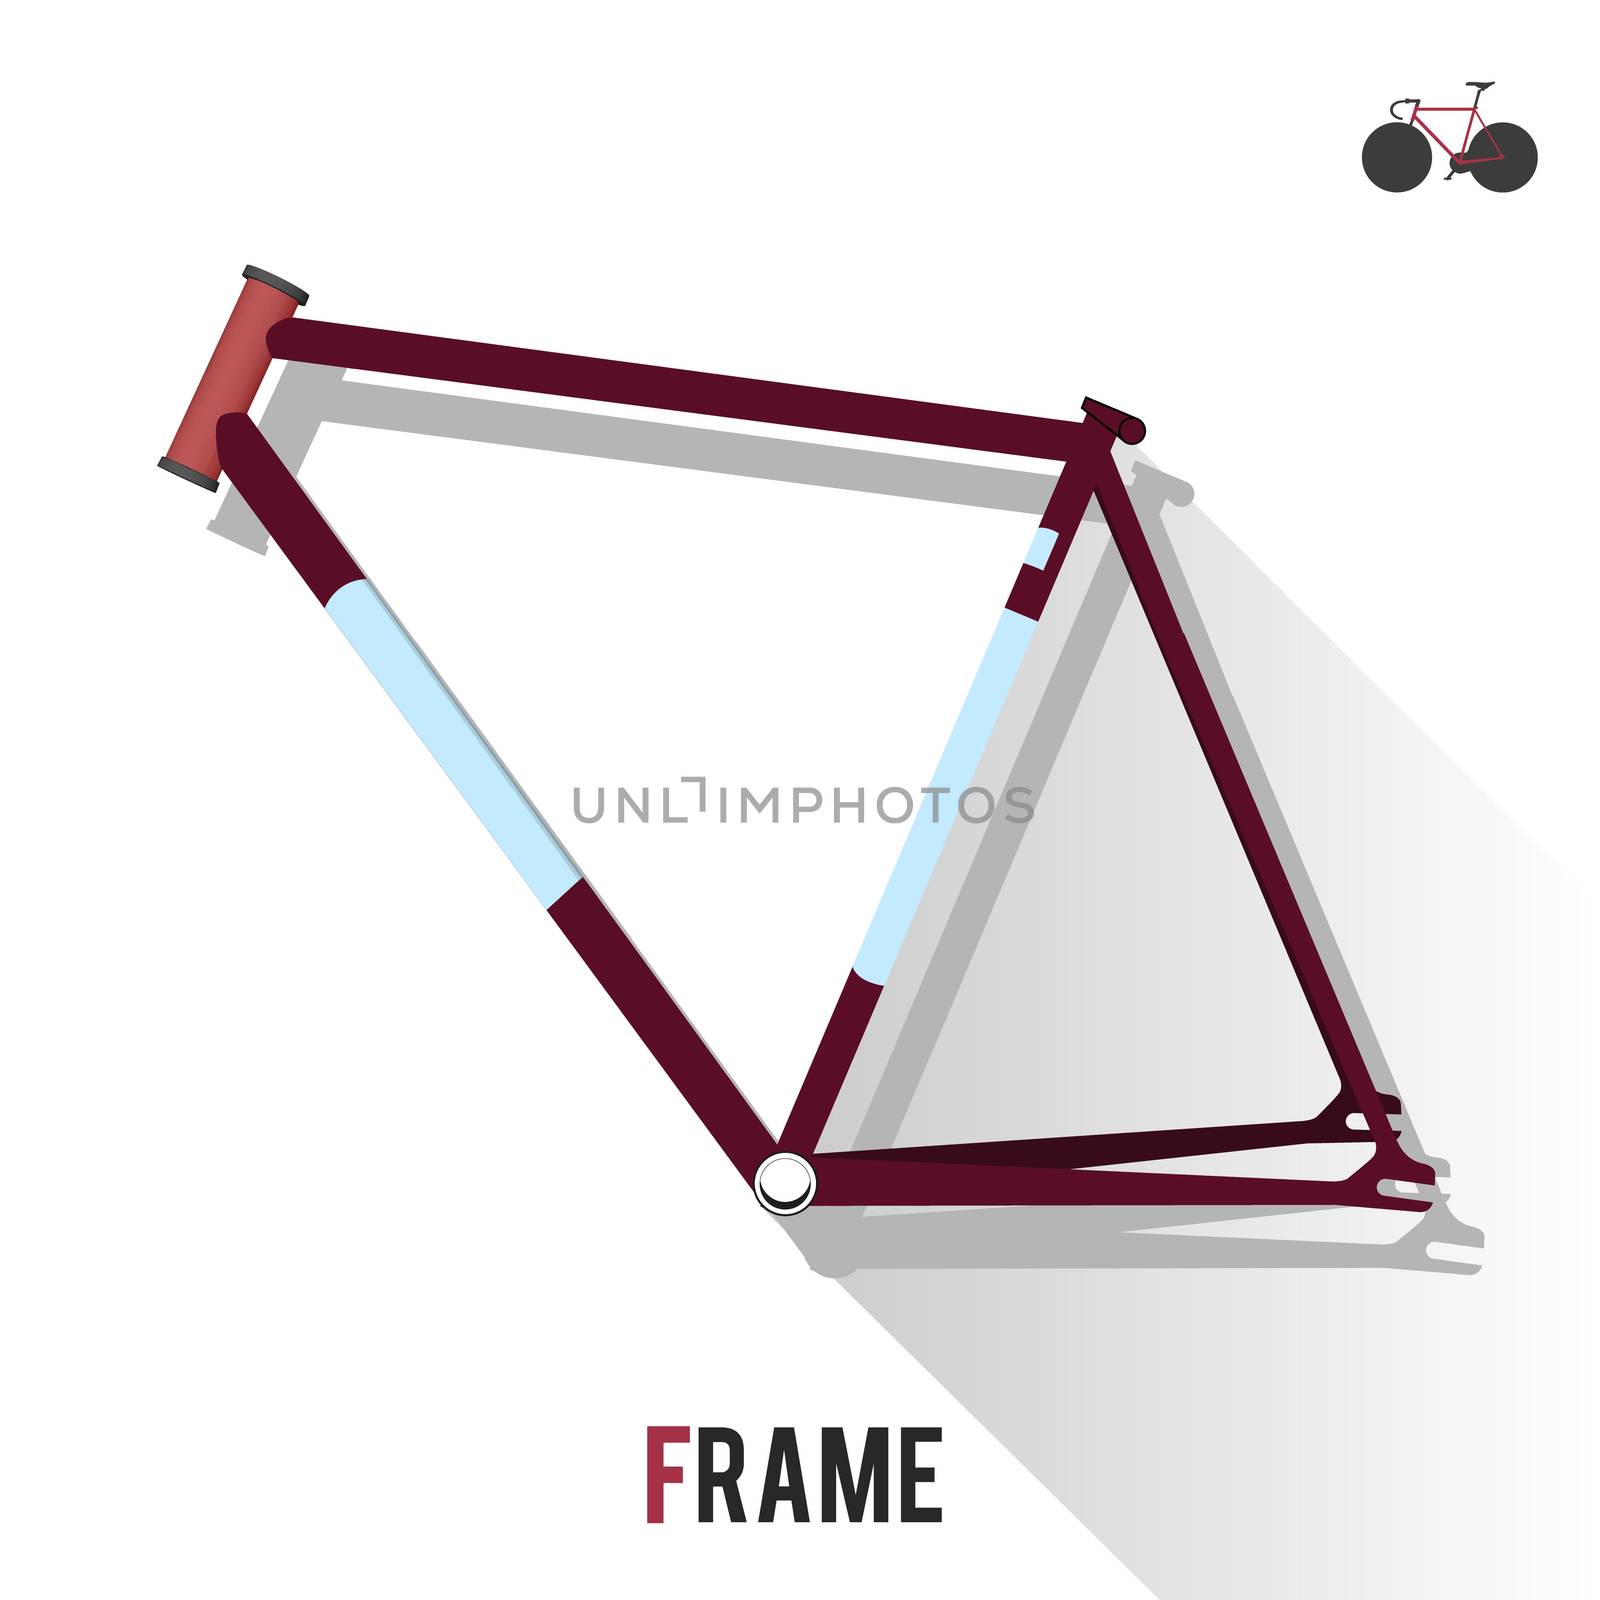 Fixed Gear or Single speed Bike's Frame on White Background With Key Image on Top-Right Corner